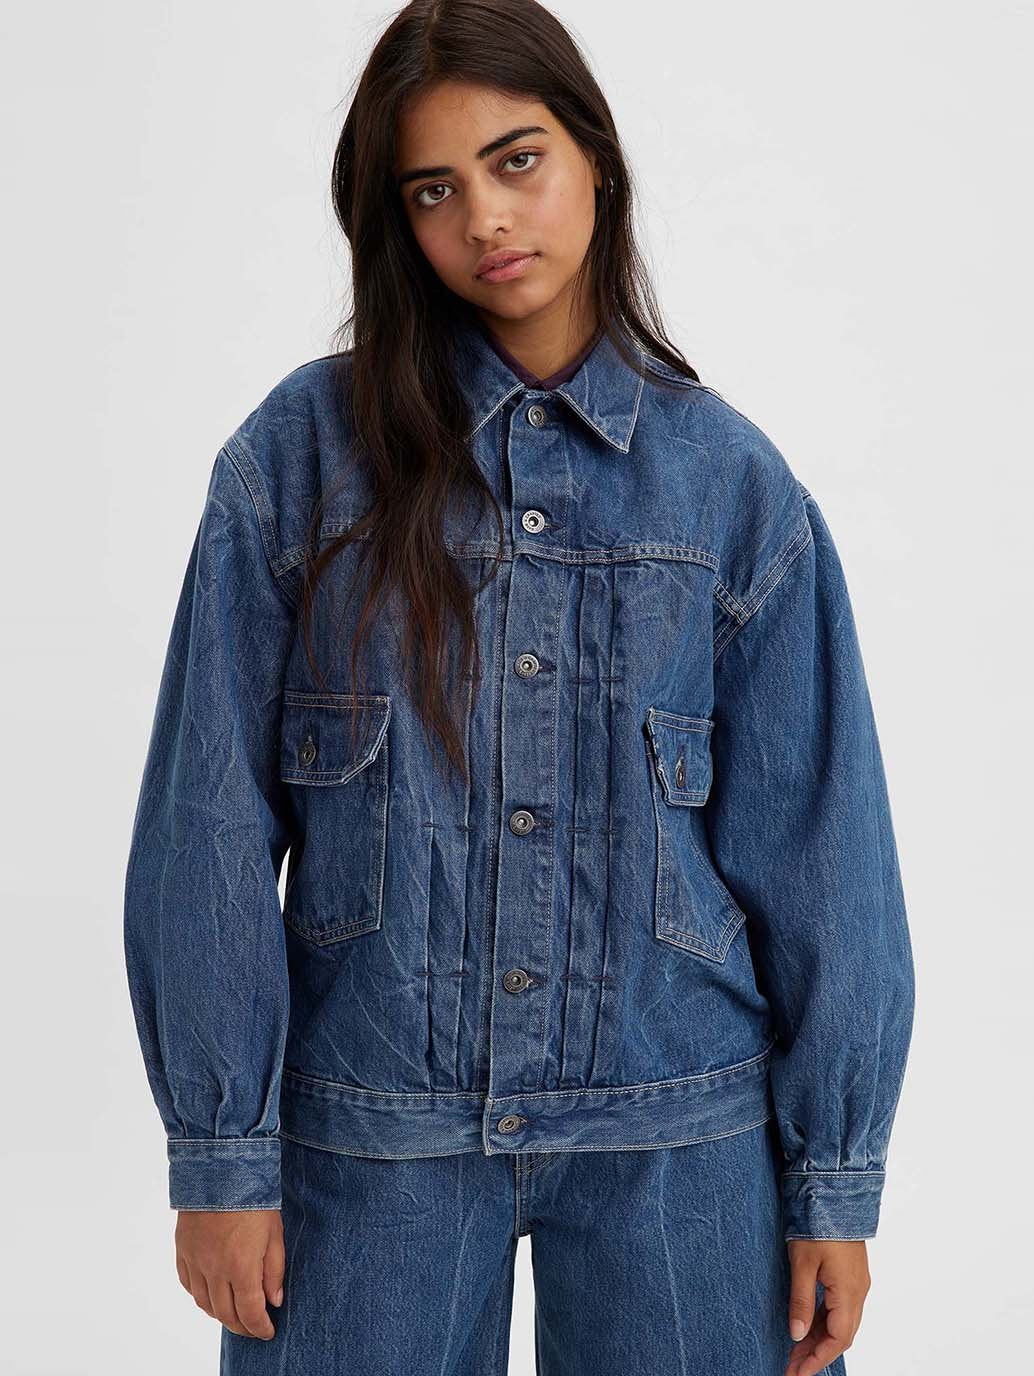 Levi's® Made & Crafted® Women's Tucked Type ii Trucker Jacket